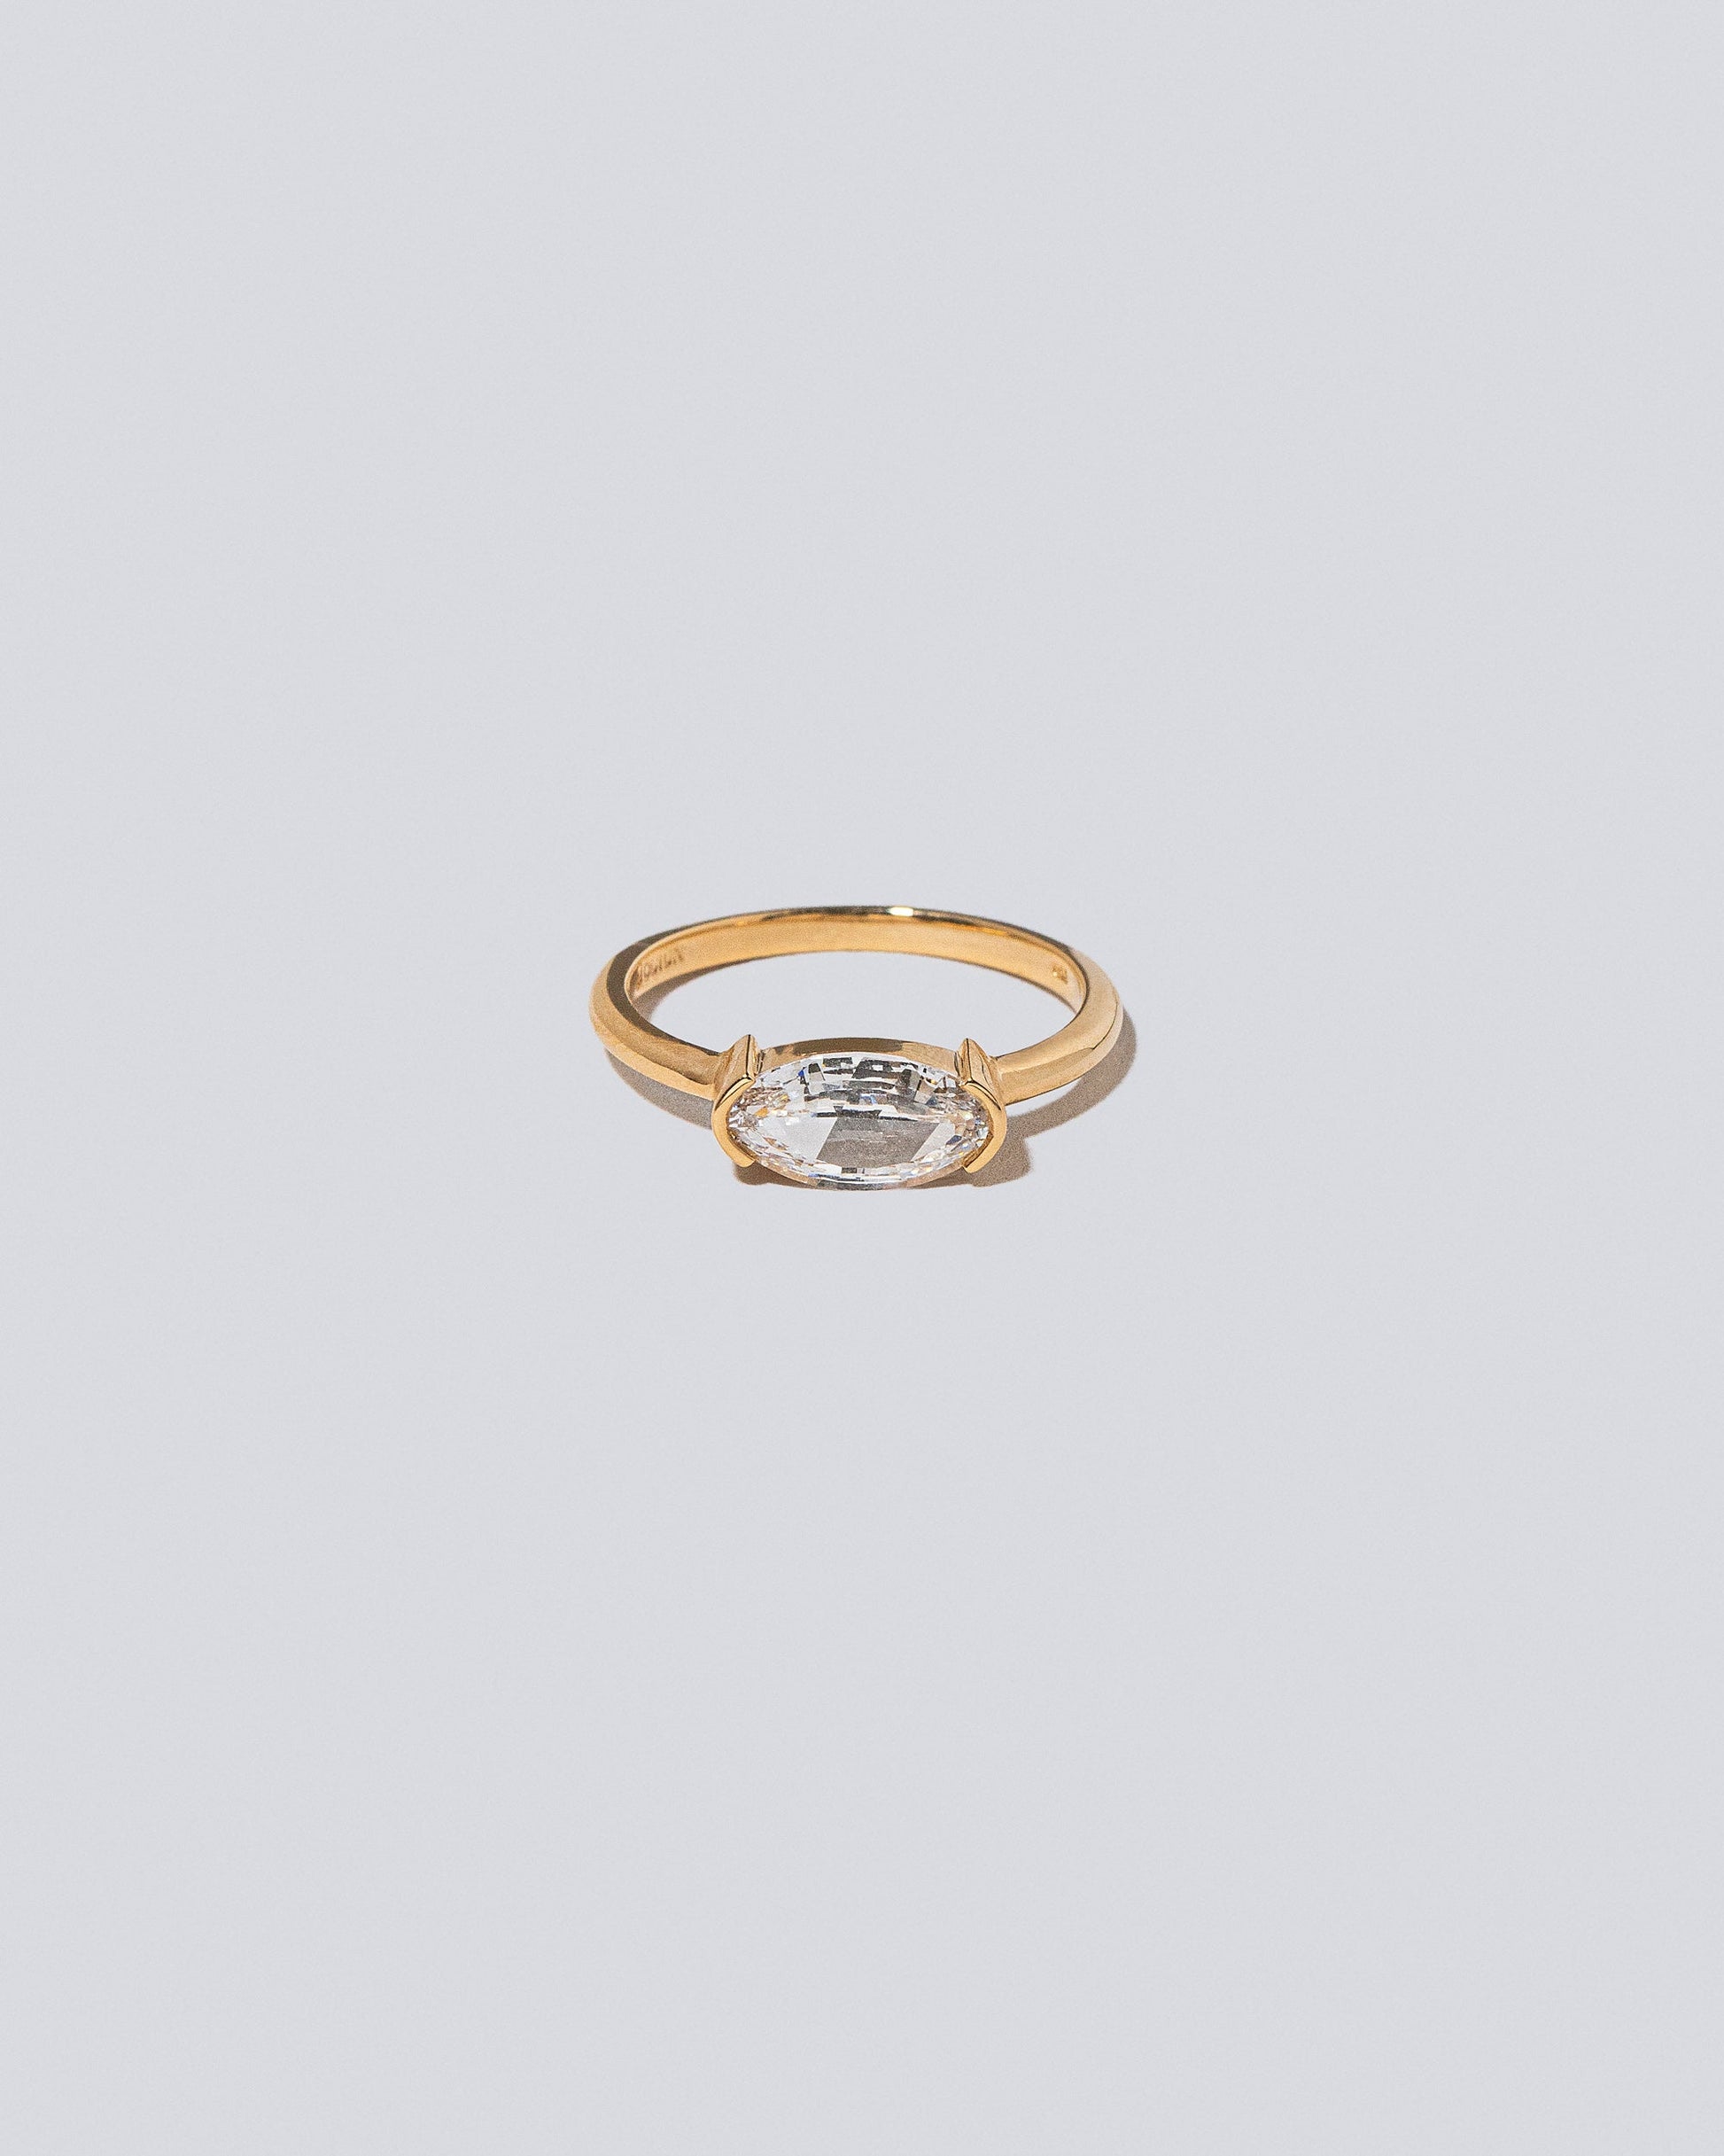 Product photo of the Jeté Ring on light color background